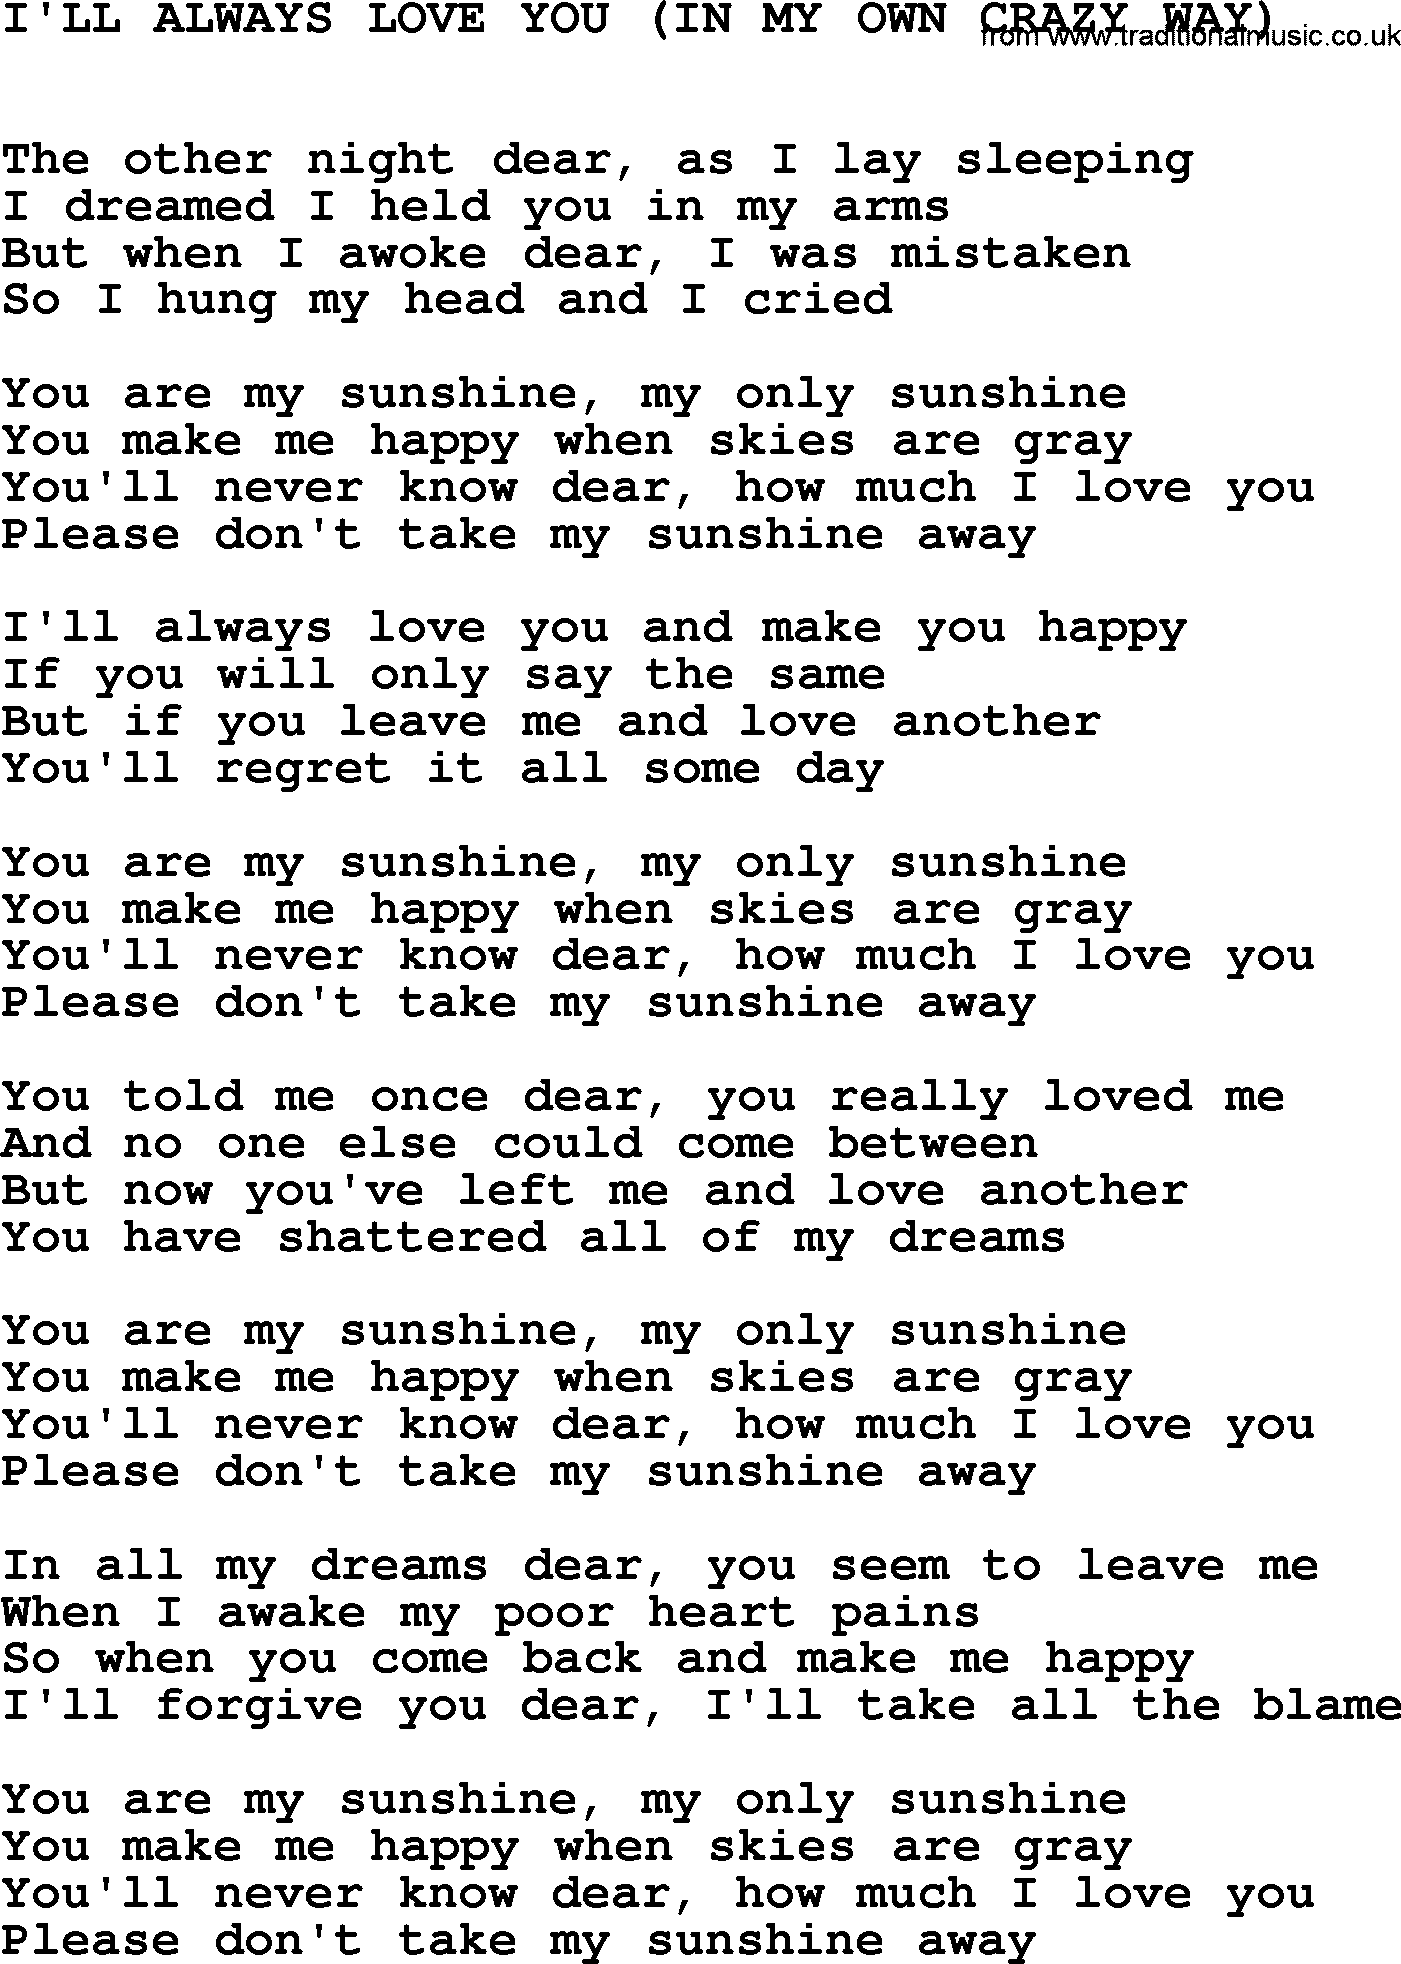 Johnny Cash Song I Ll Always Love You In My Own Crazy Way Lyrics Don't miss out on what your friends are enjoying. traditional music library